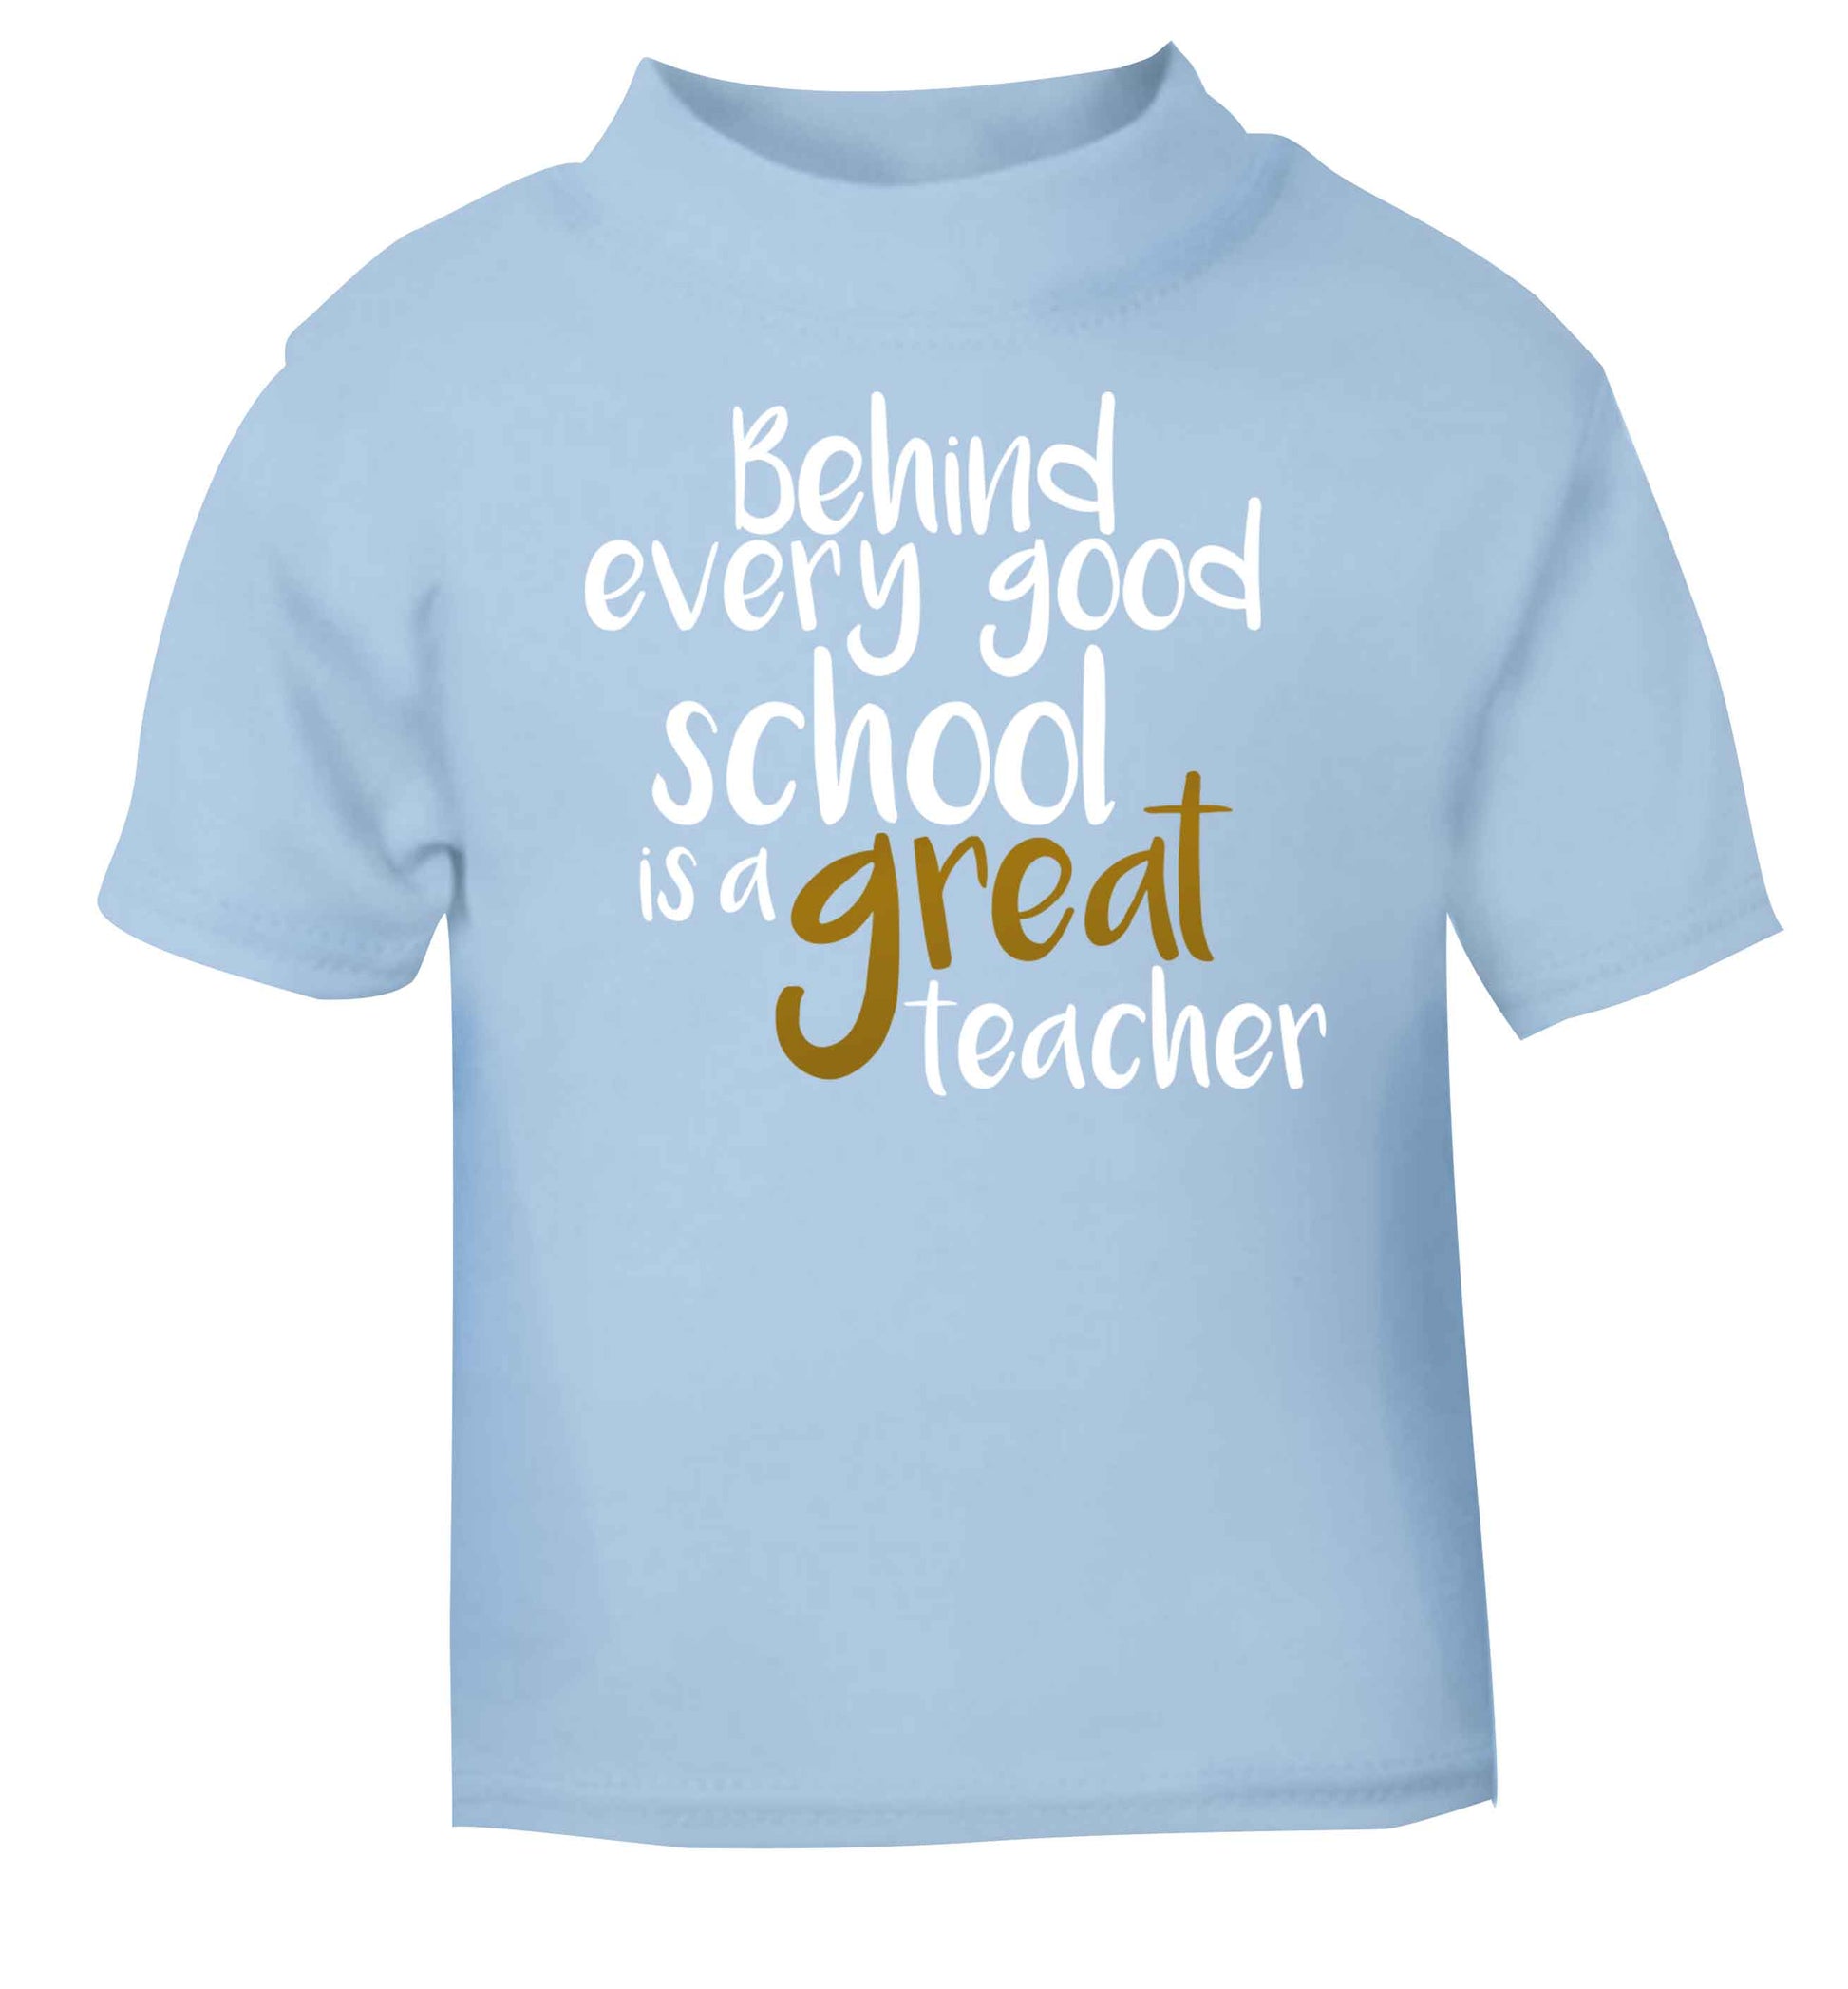 Behind every good school is a great teacher light blue baby toddler Tshirt 2 Years